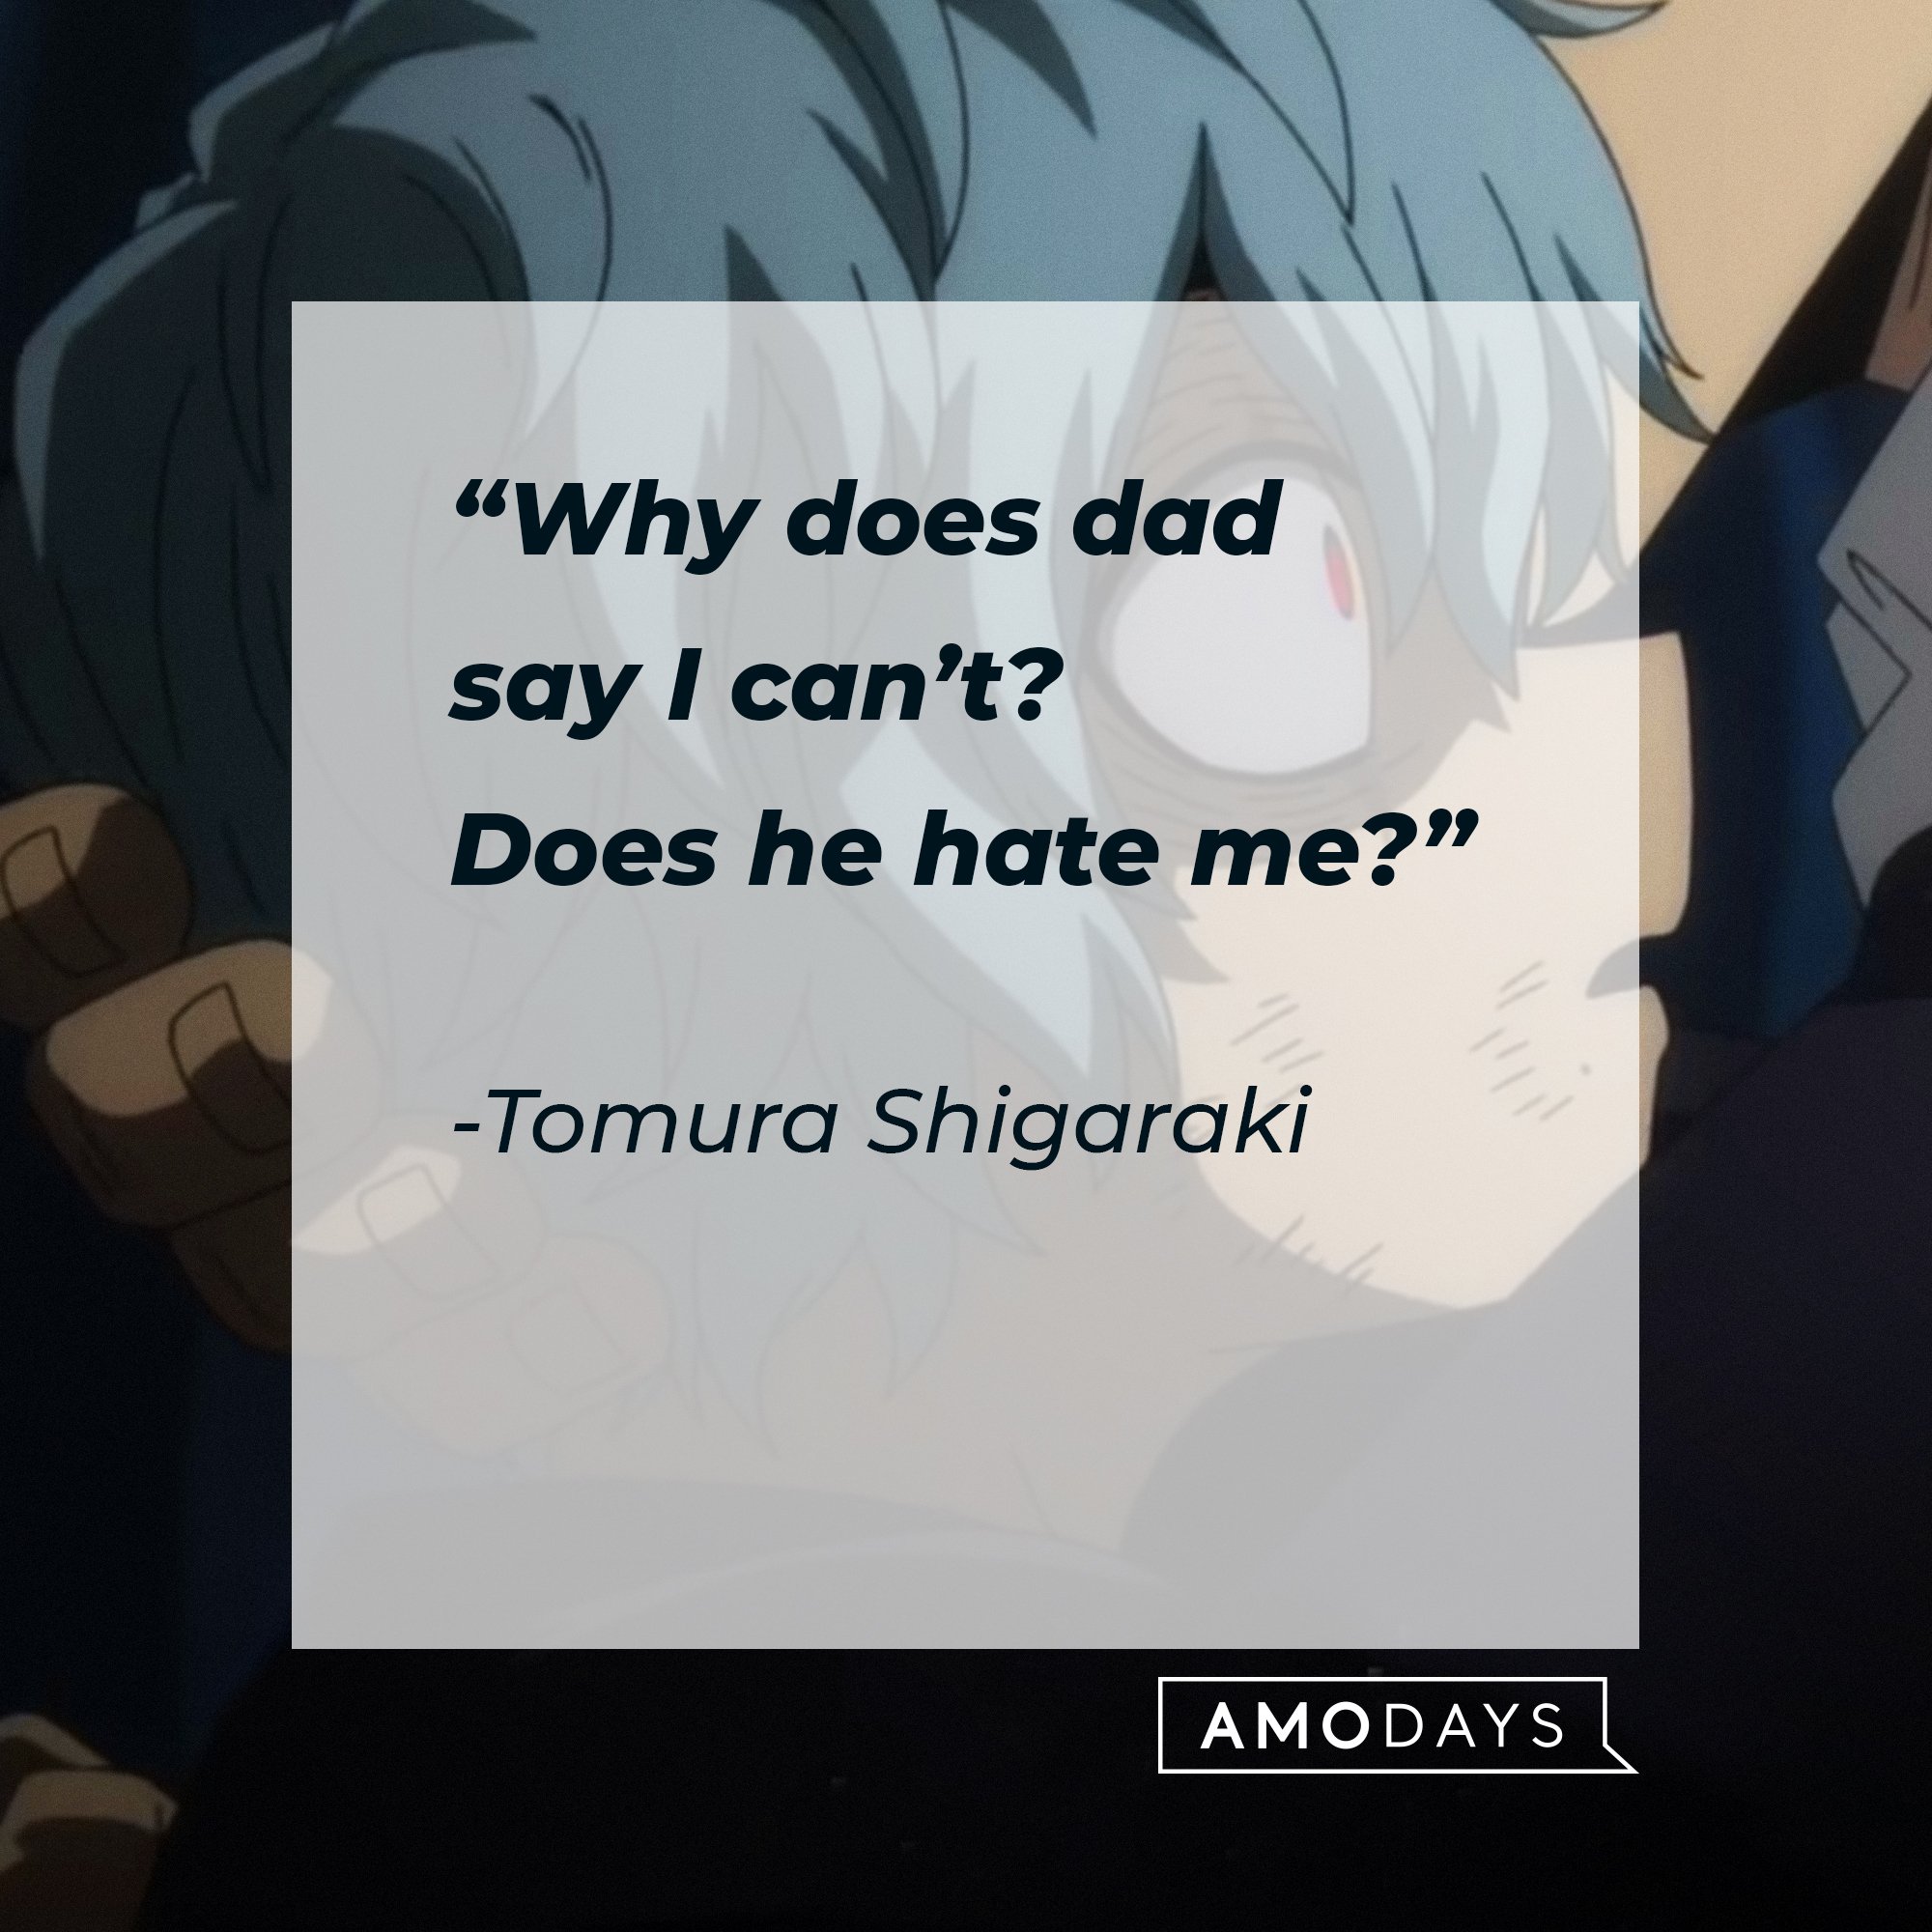 Tomura Shigaraki’s quote: "Why does dad say I can't? Does he hate me?" | Image: AmoDays